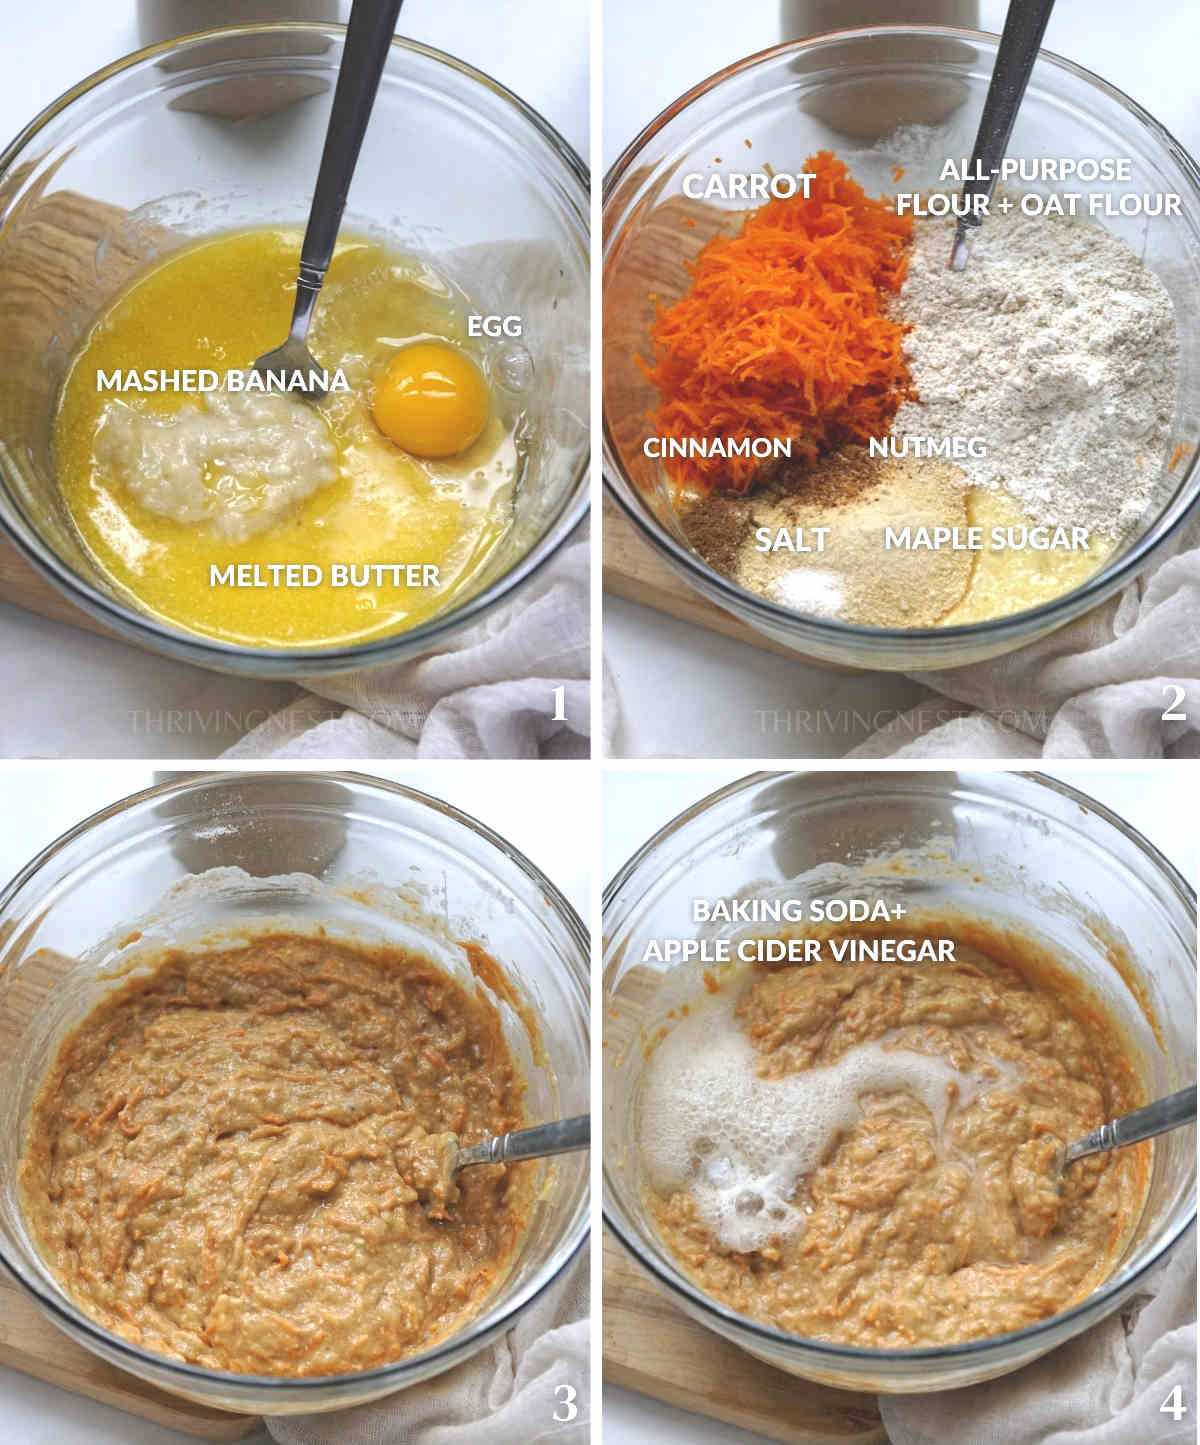 Process shots showing how to mix dry ingredients with wet ingredients and form the banana and carrot muffin dough.